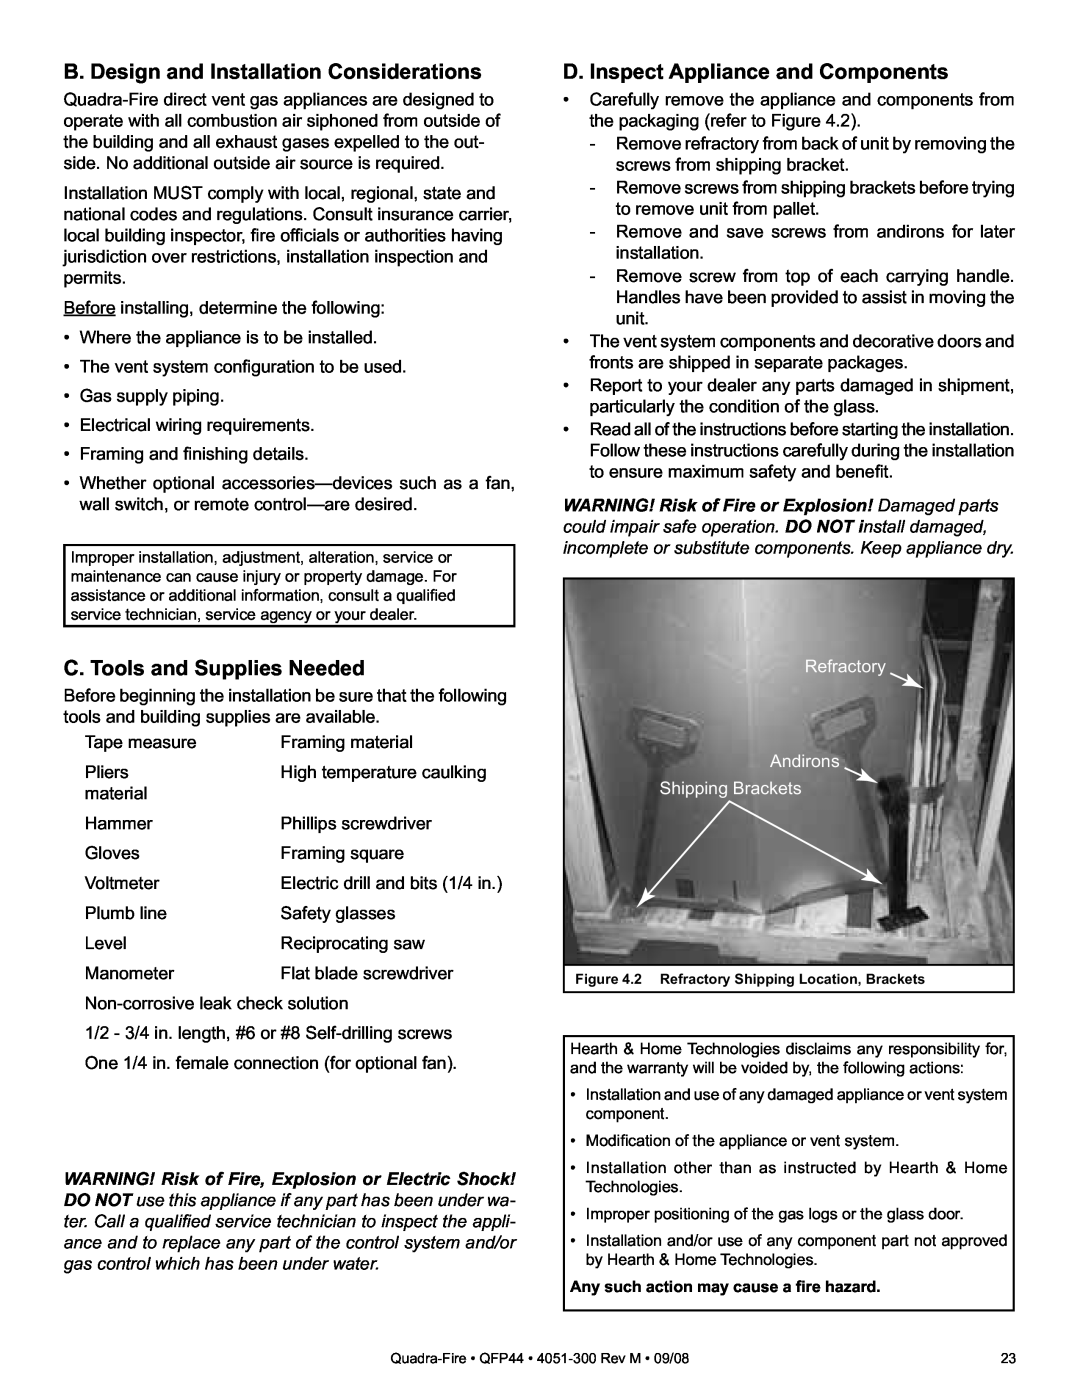 Quadra-Fire QFP44 owner manual B. Design and Installation Considerations, C. Tools and Supplies Needed 